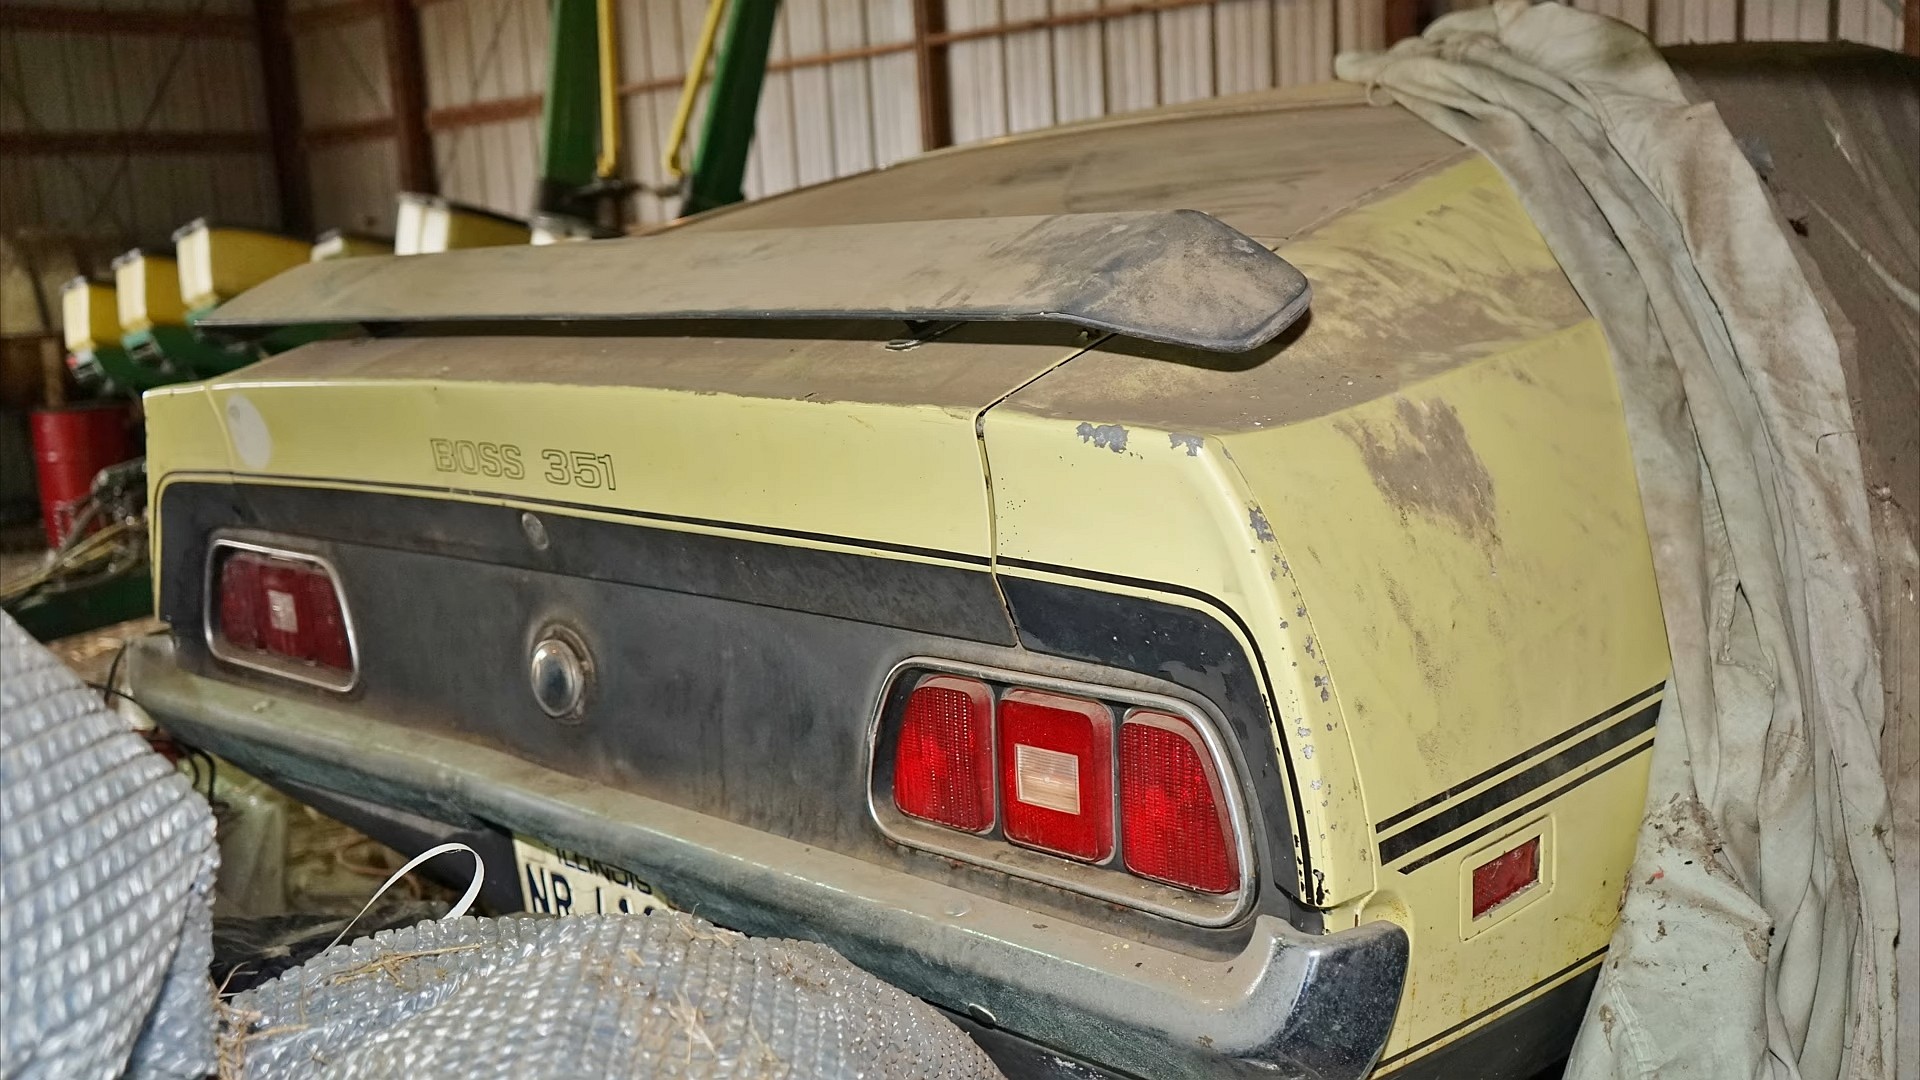 1971 ford mustang boss 351 that spent 46 years in a barn is a rat infested survivor 4